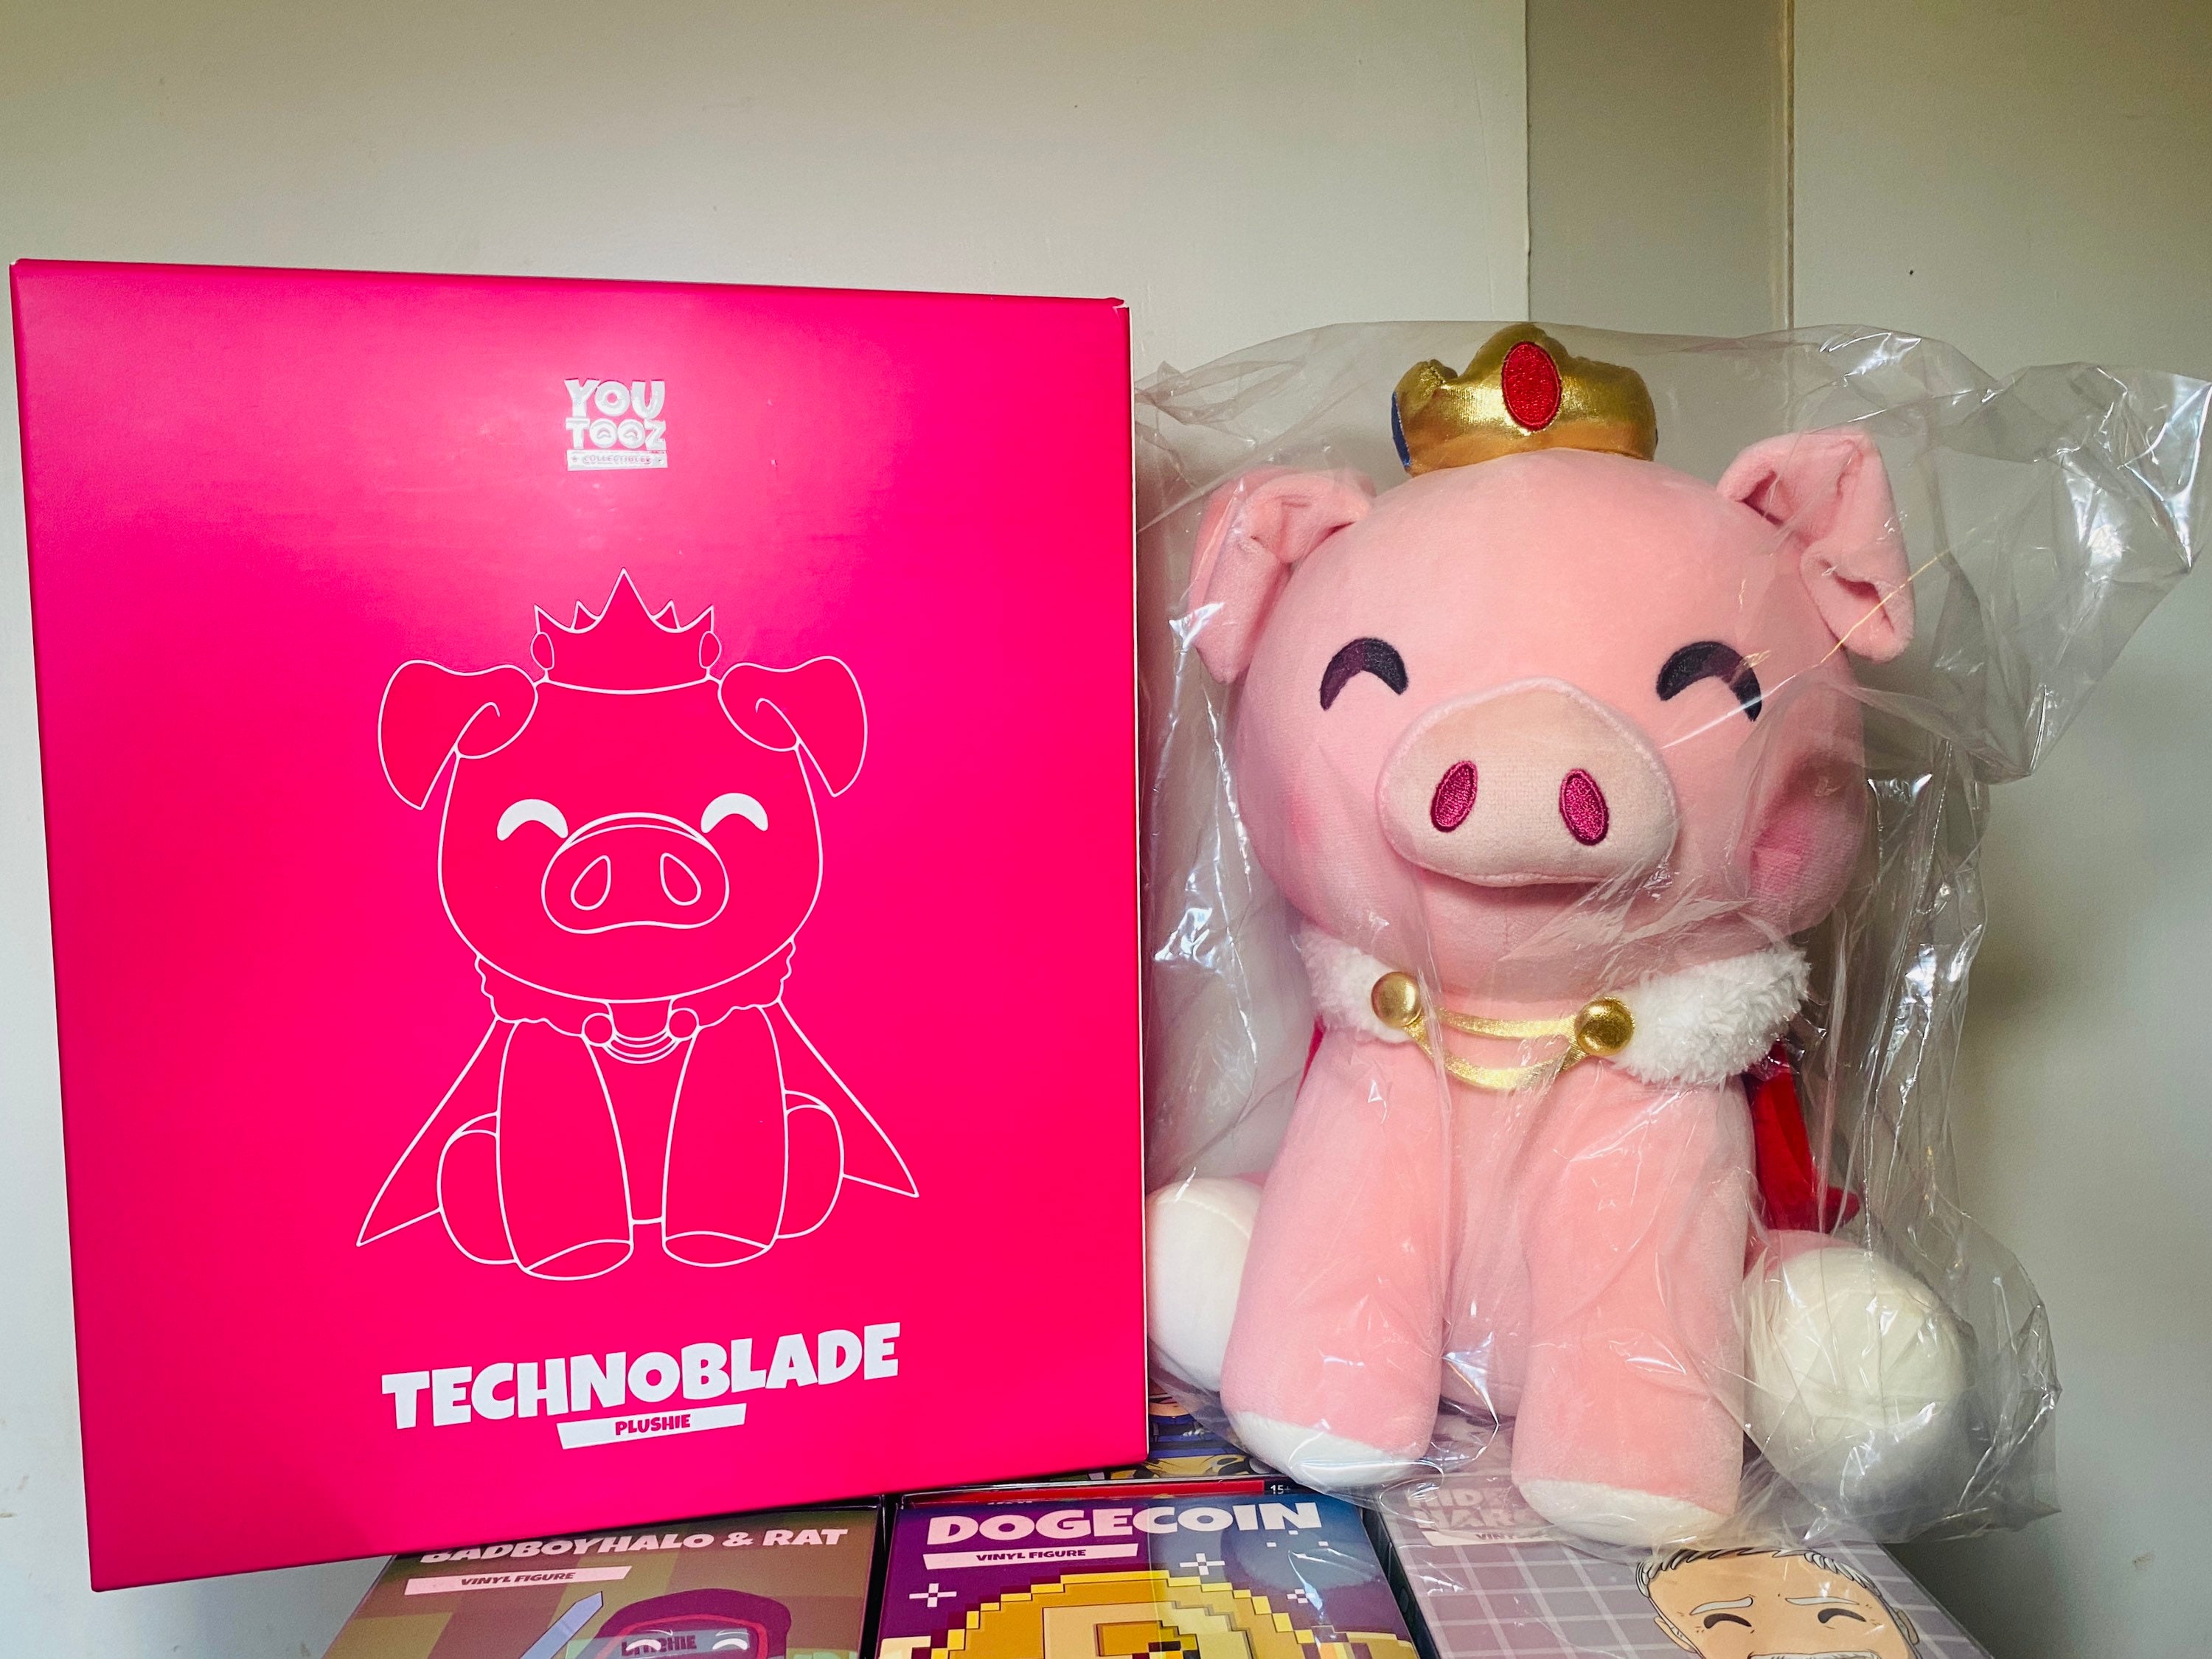 The Technoblade plush I won on Twitter finally arrived today